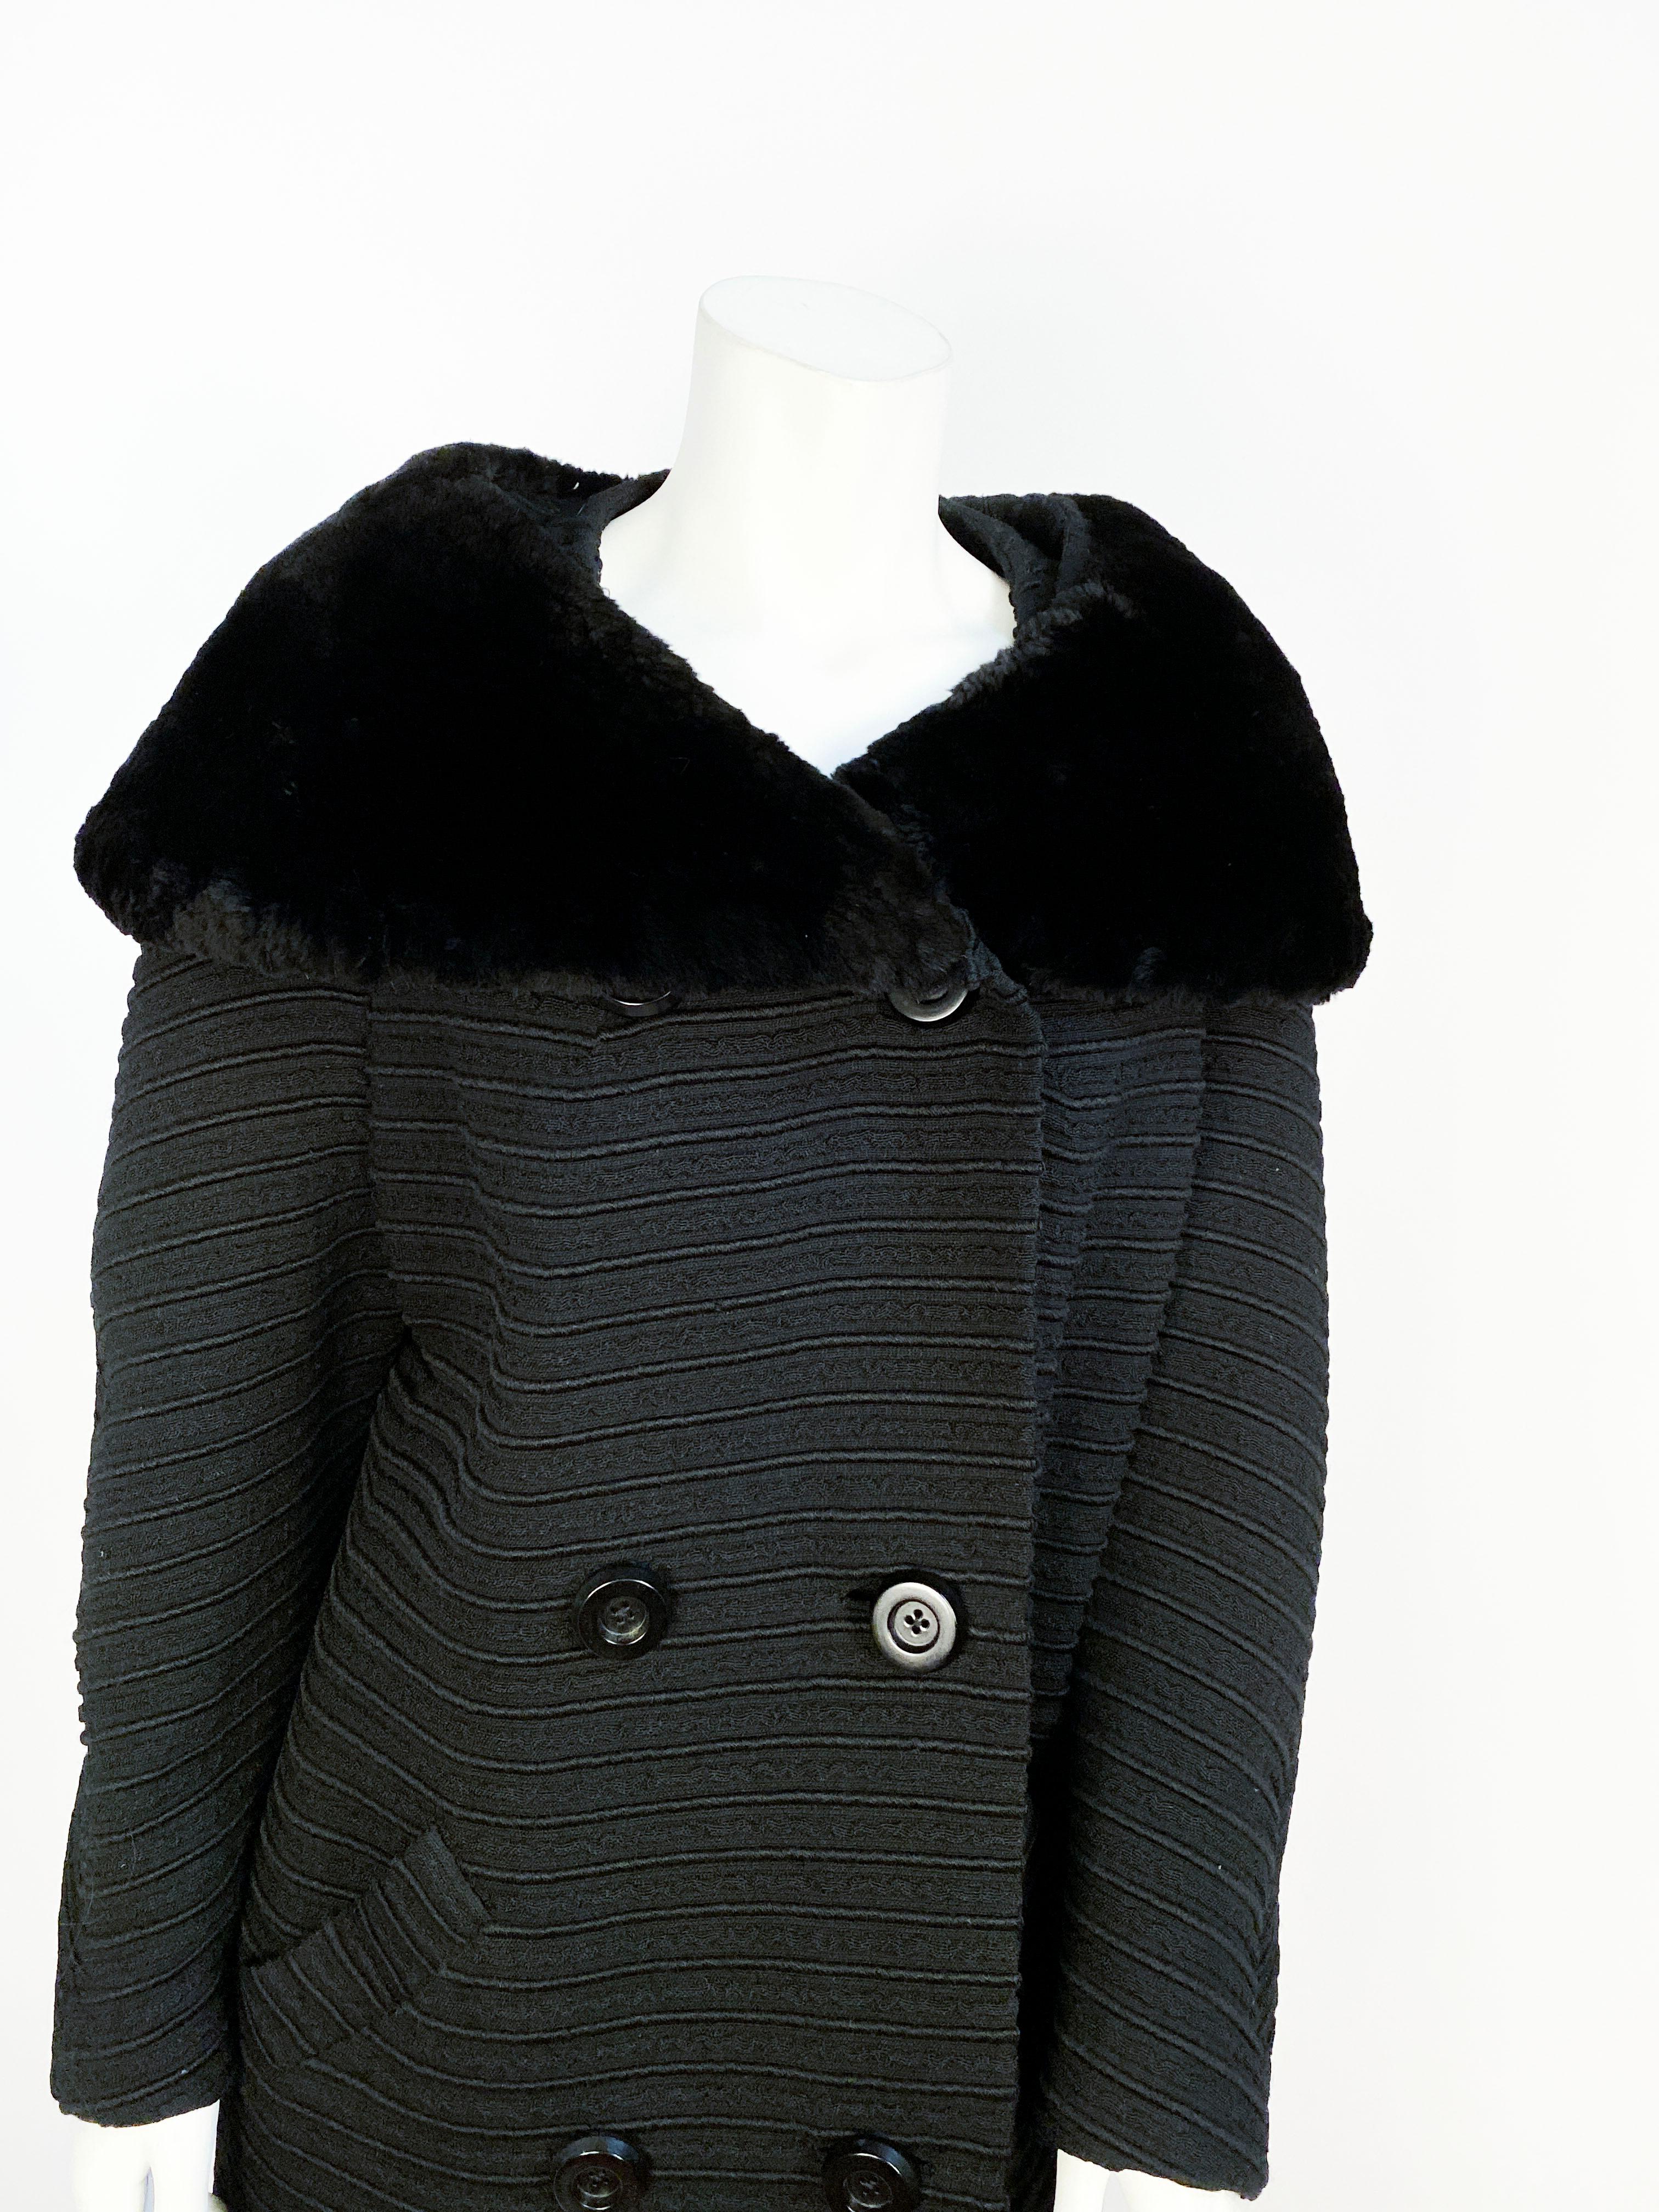 1960s Black coat made of textured ribbed wool finished with a sheared beaver collar.